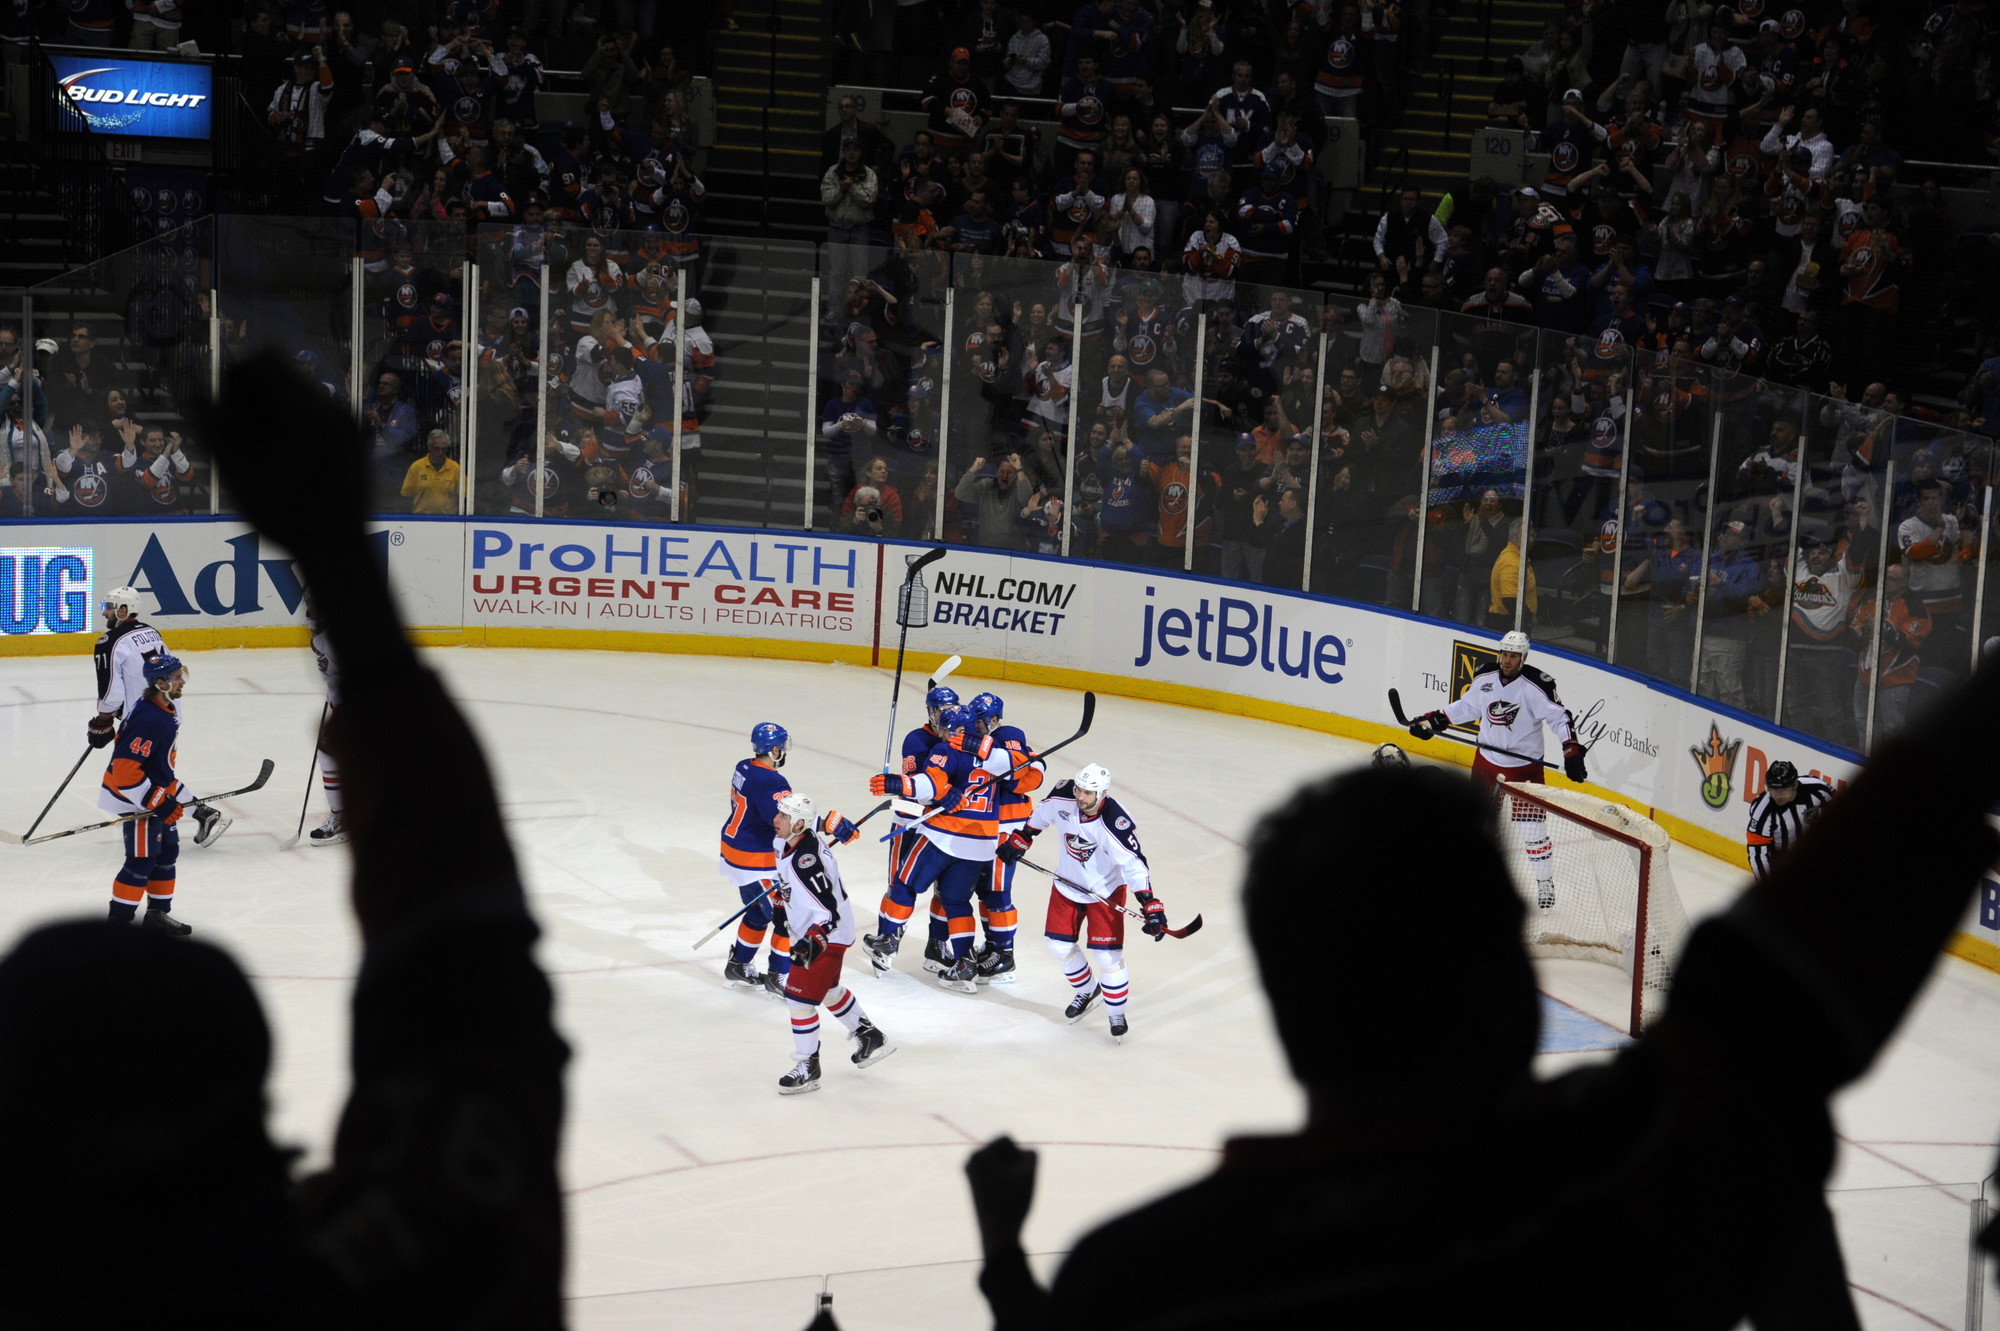 More than 16,000 fans attended the final regular season game at Nassau Coliseum, marking the 27th sellout for the Islanders this season. The building will be packed once again on Sunday when the Islanders host the Washington Capitals in the first round of the National Hockey League playoffs.